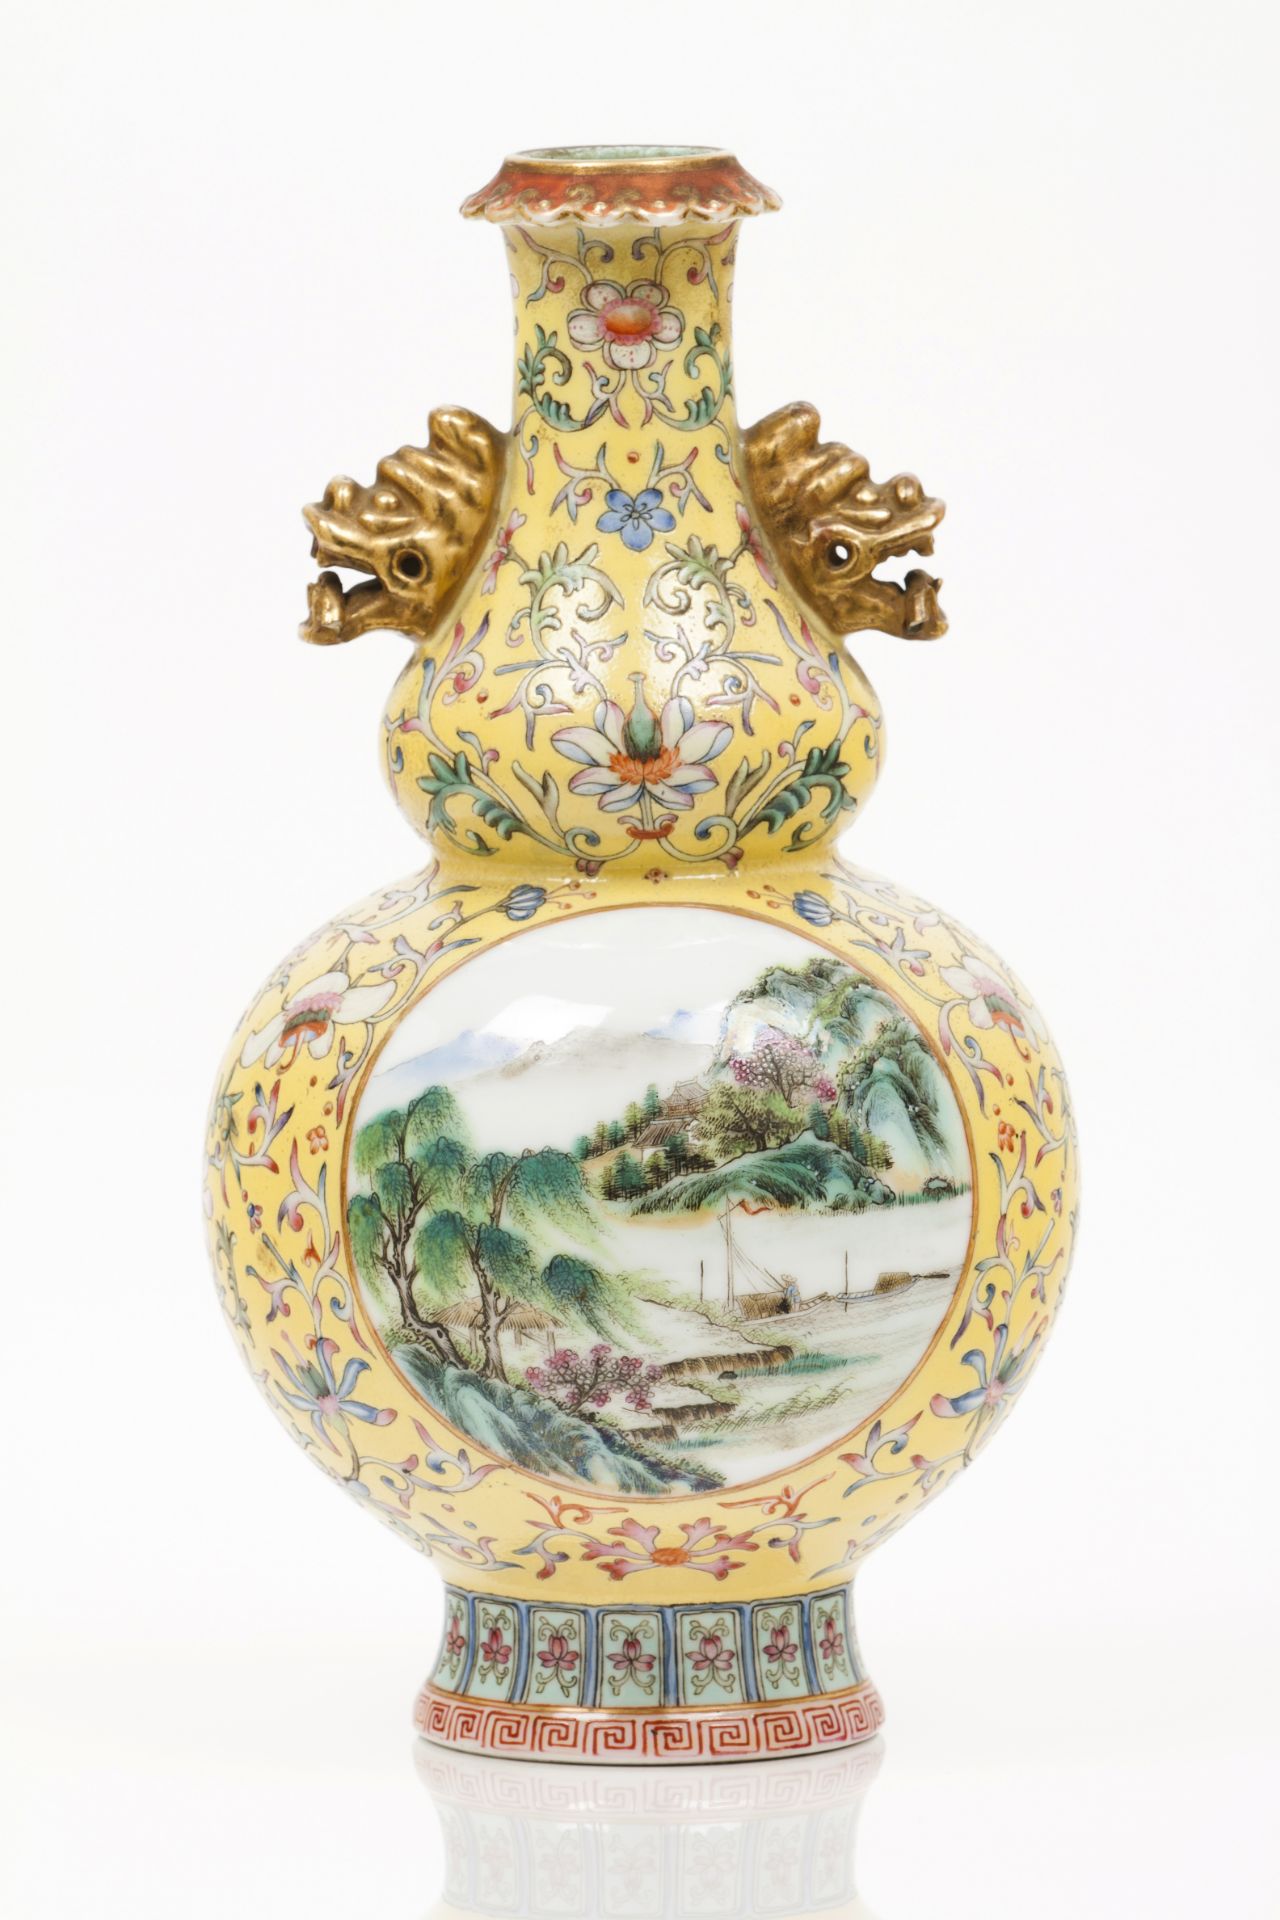 A gourdChinese porcelainPolychrome "Famille Rose" enamelled decoration of floral motifs on a